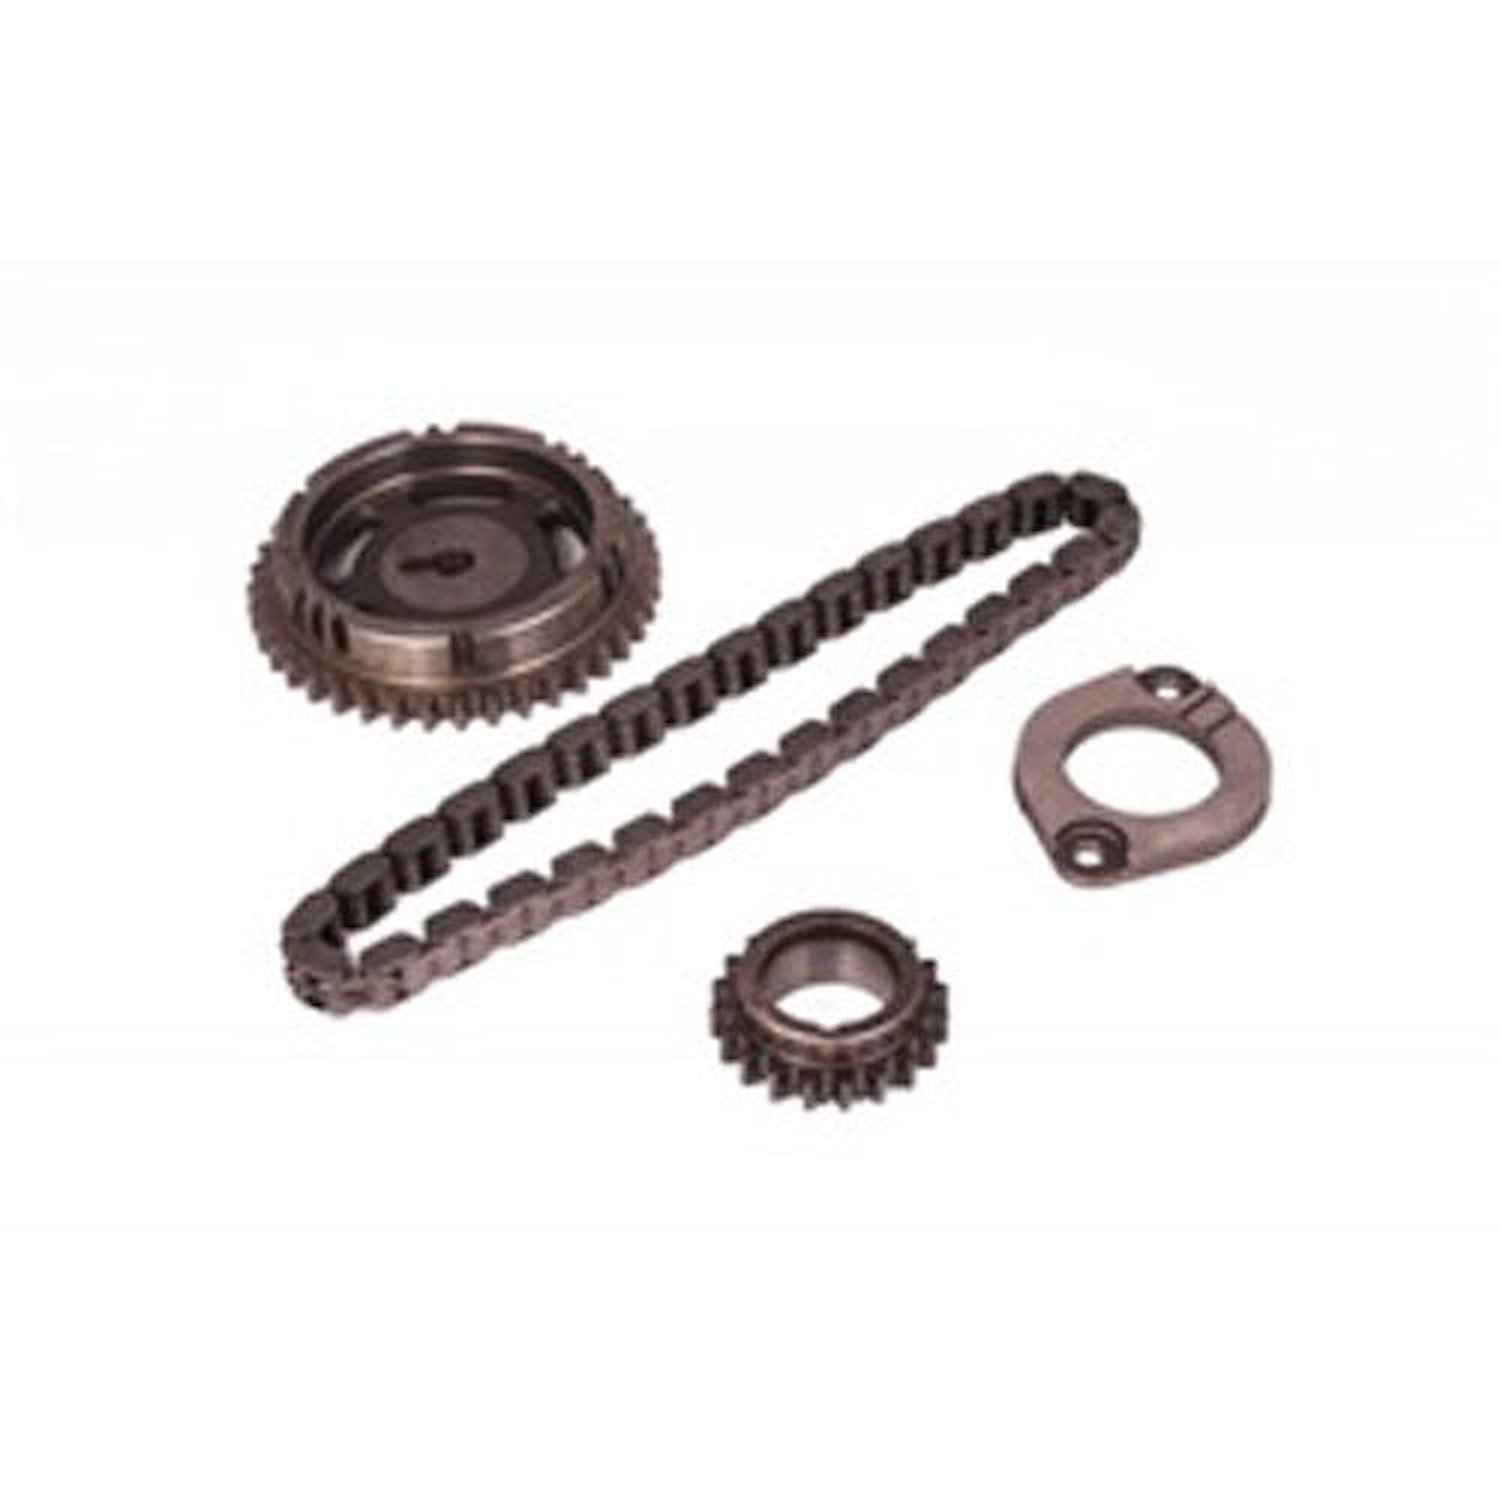 Replacement timing chain, Fits 3.8L engine in 07-11 Jeep Wranglers.